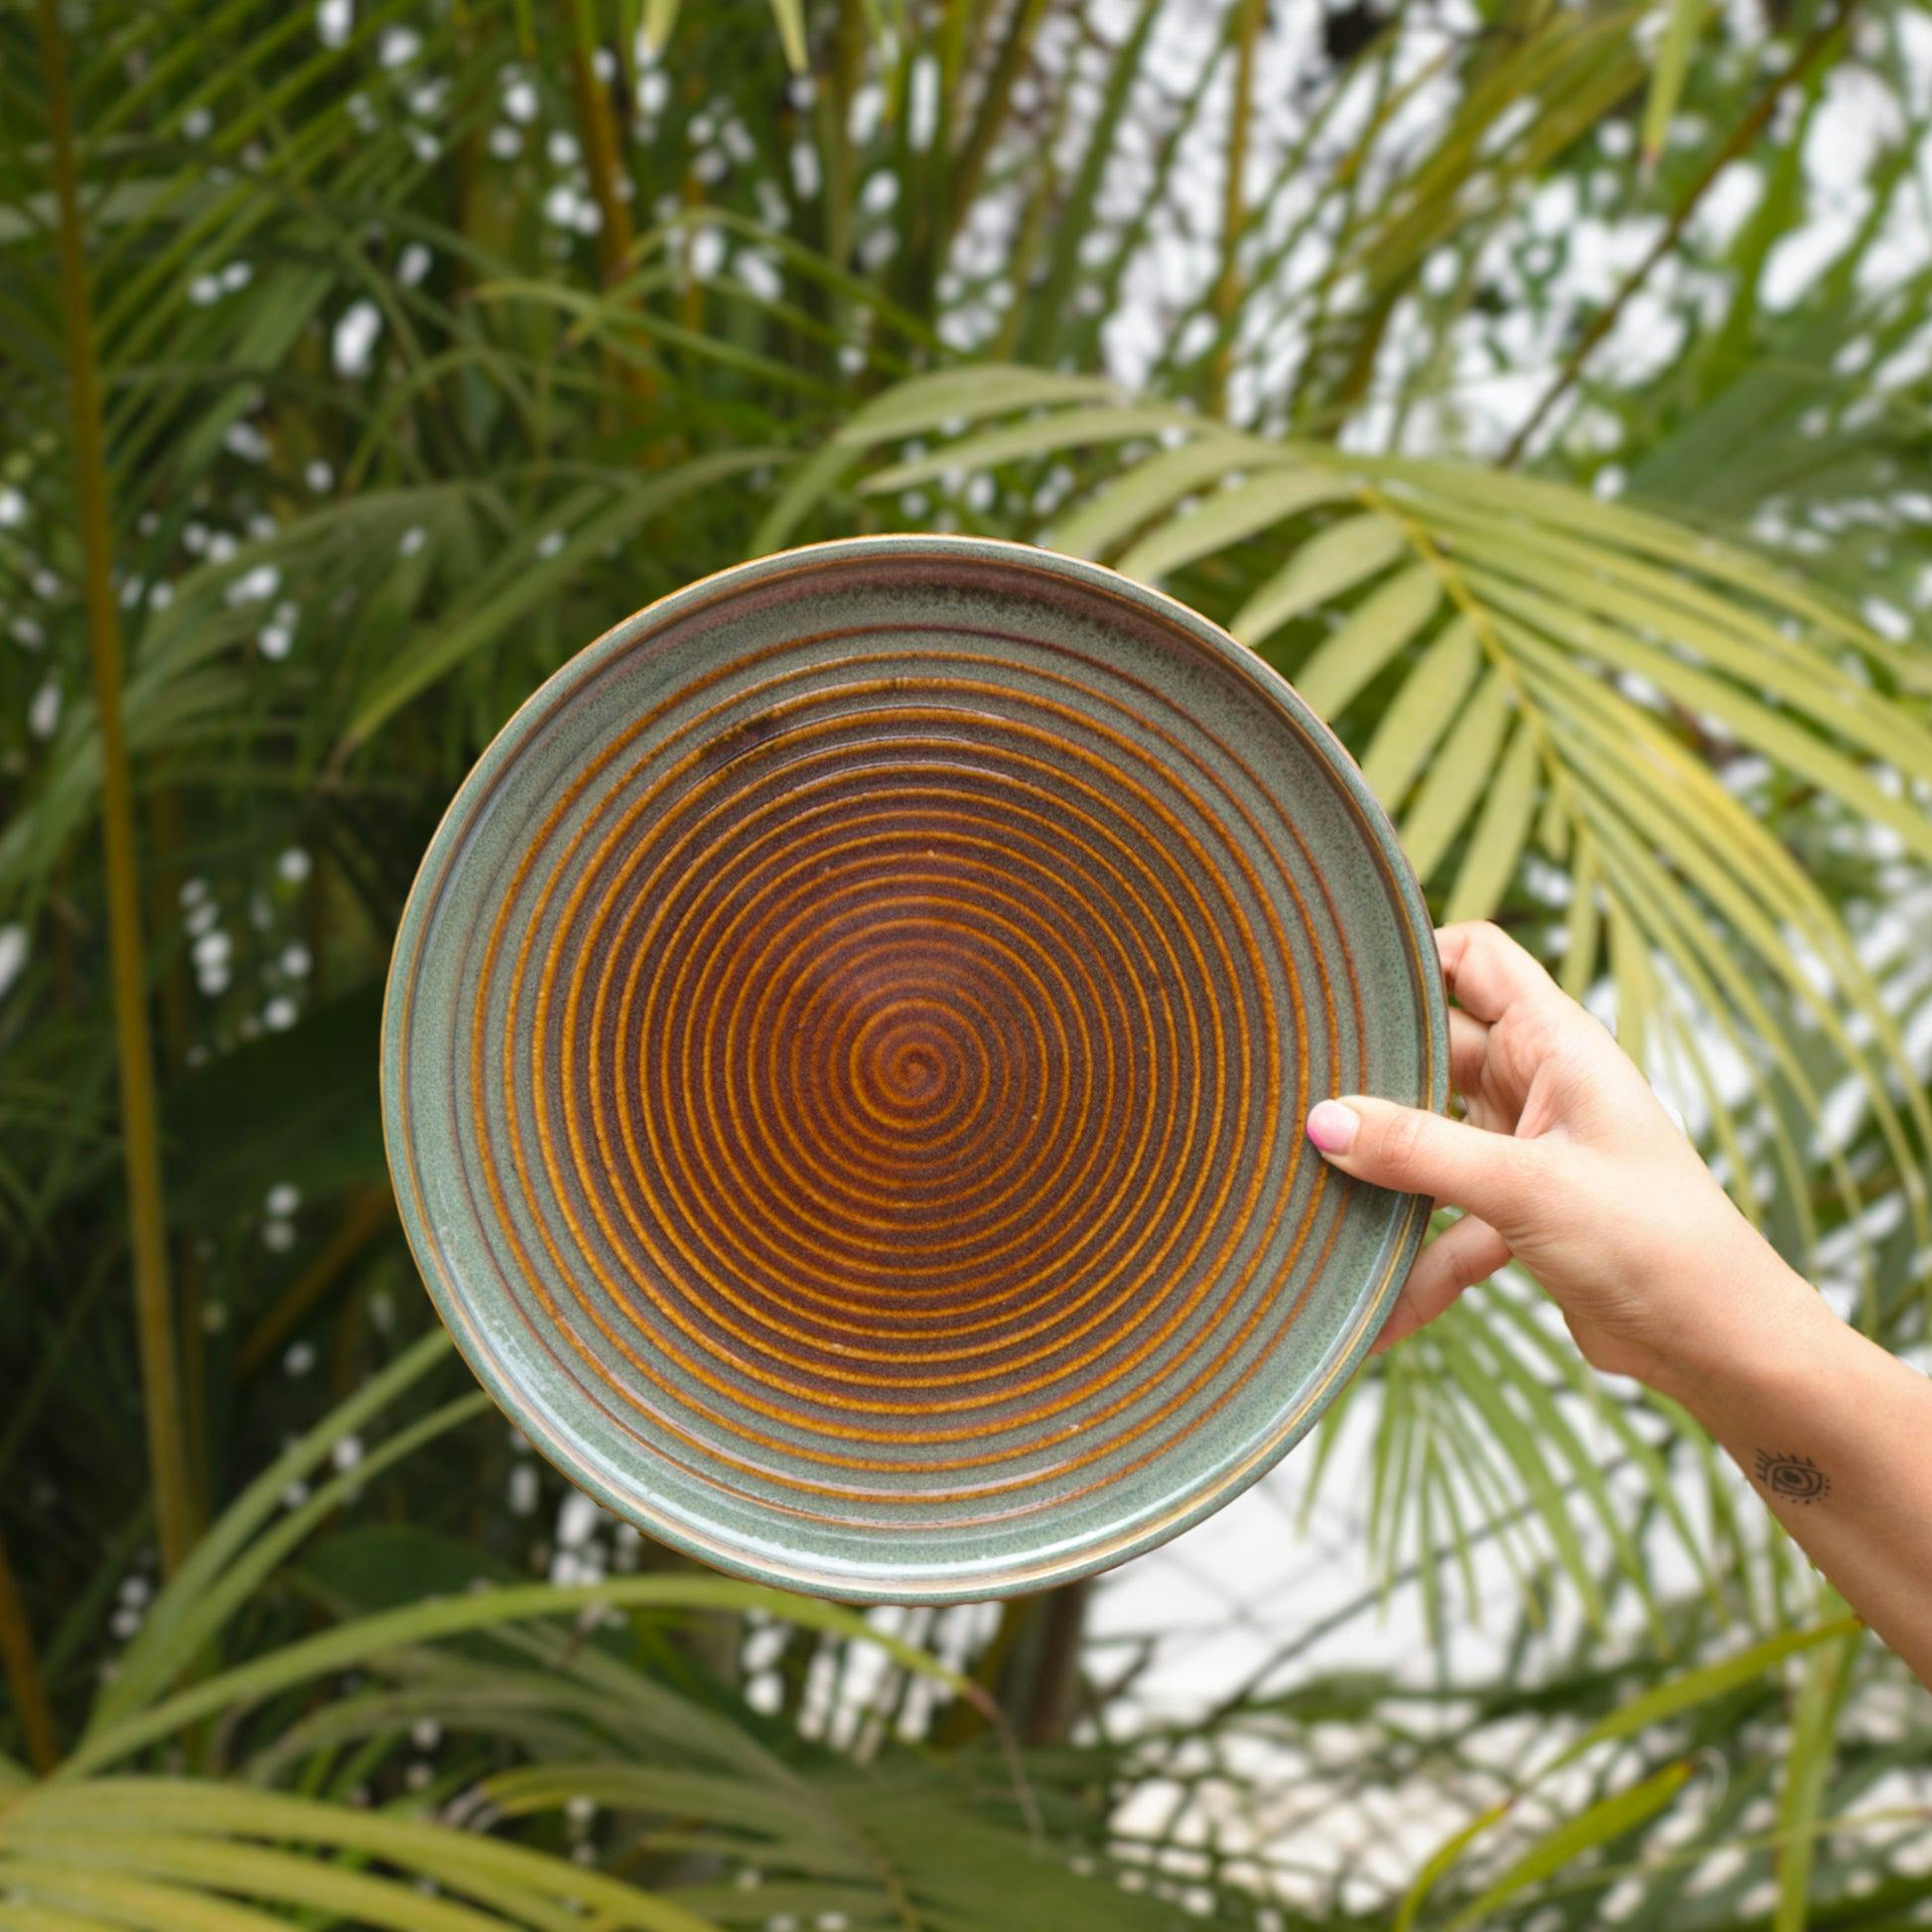 Earth Round Platter/Plate 10inch, a product by Oh Yay project